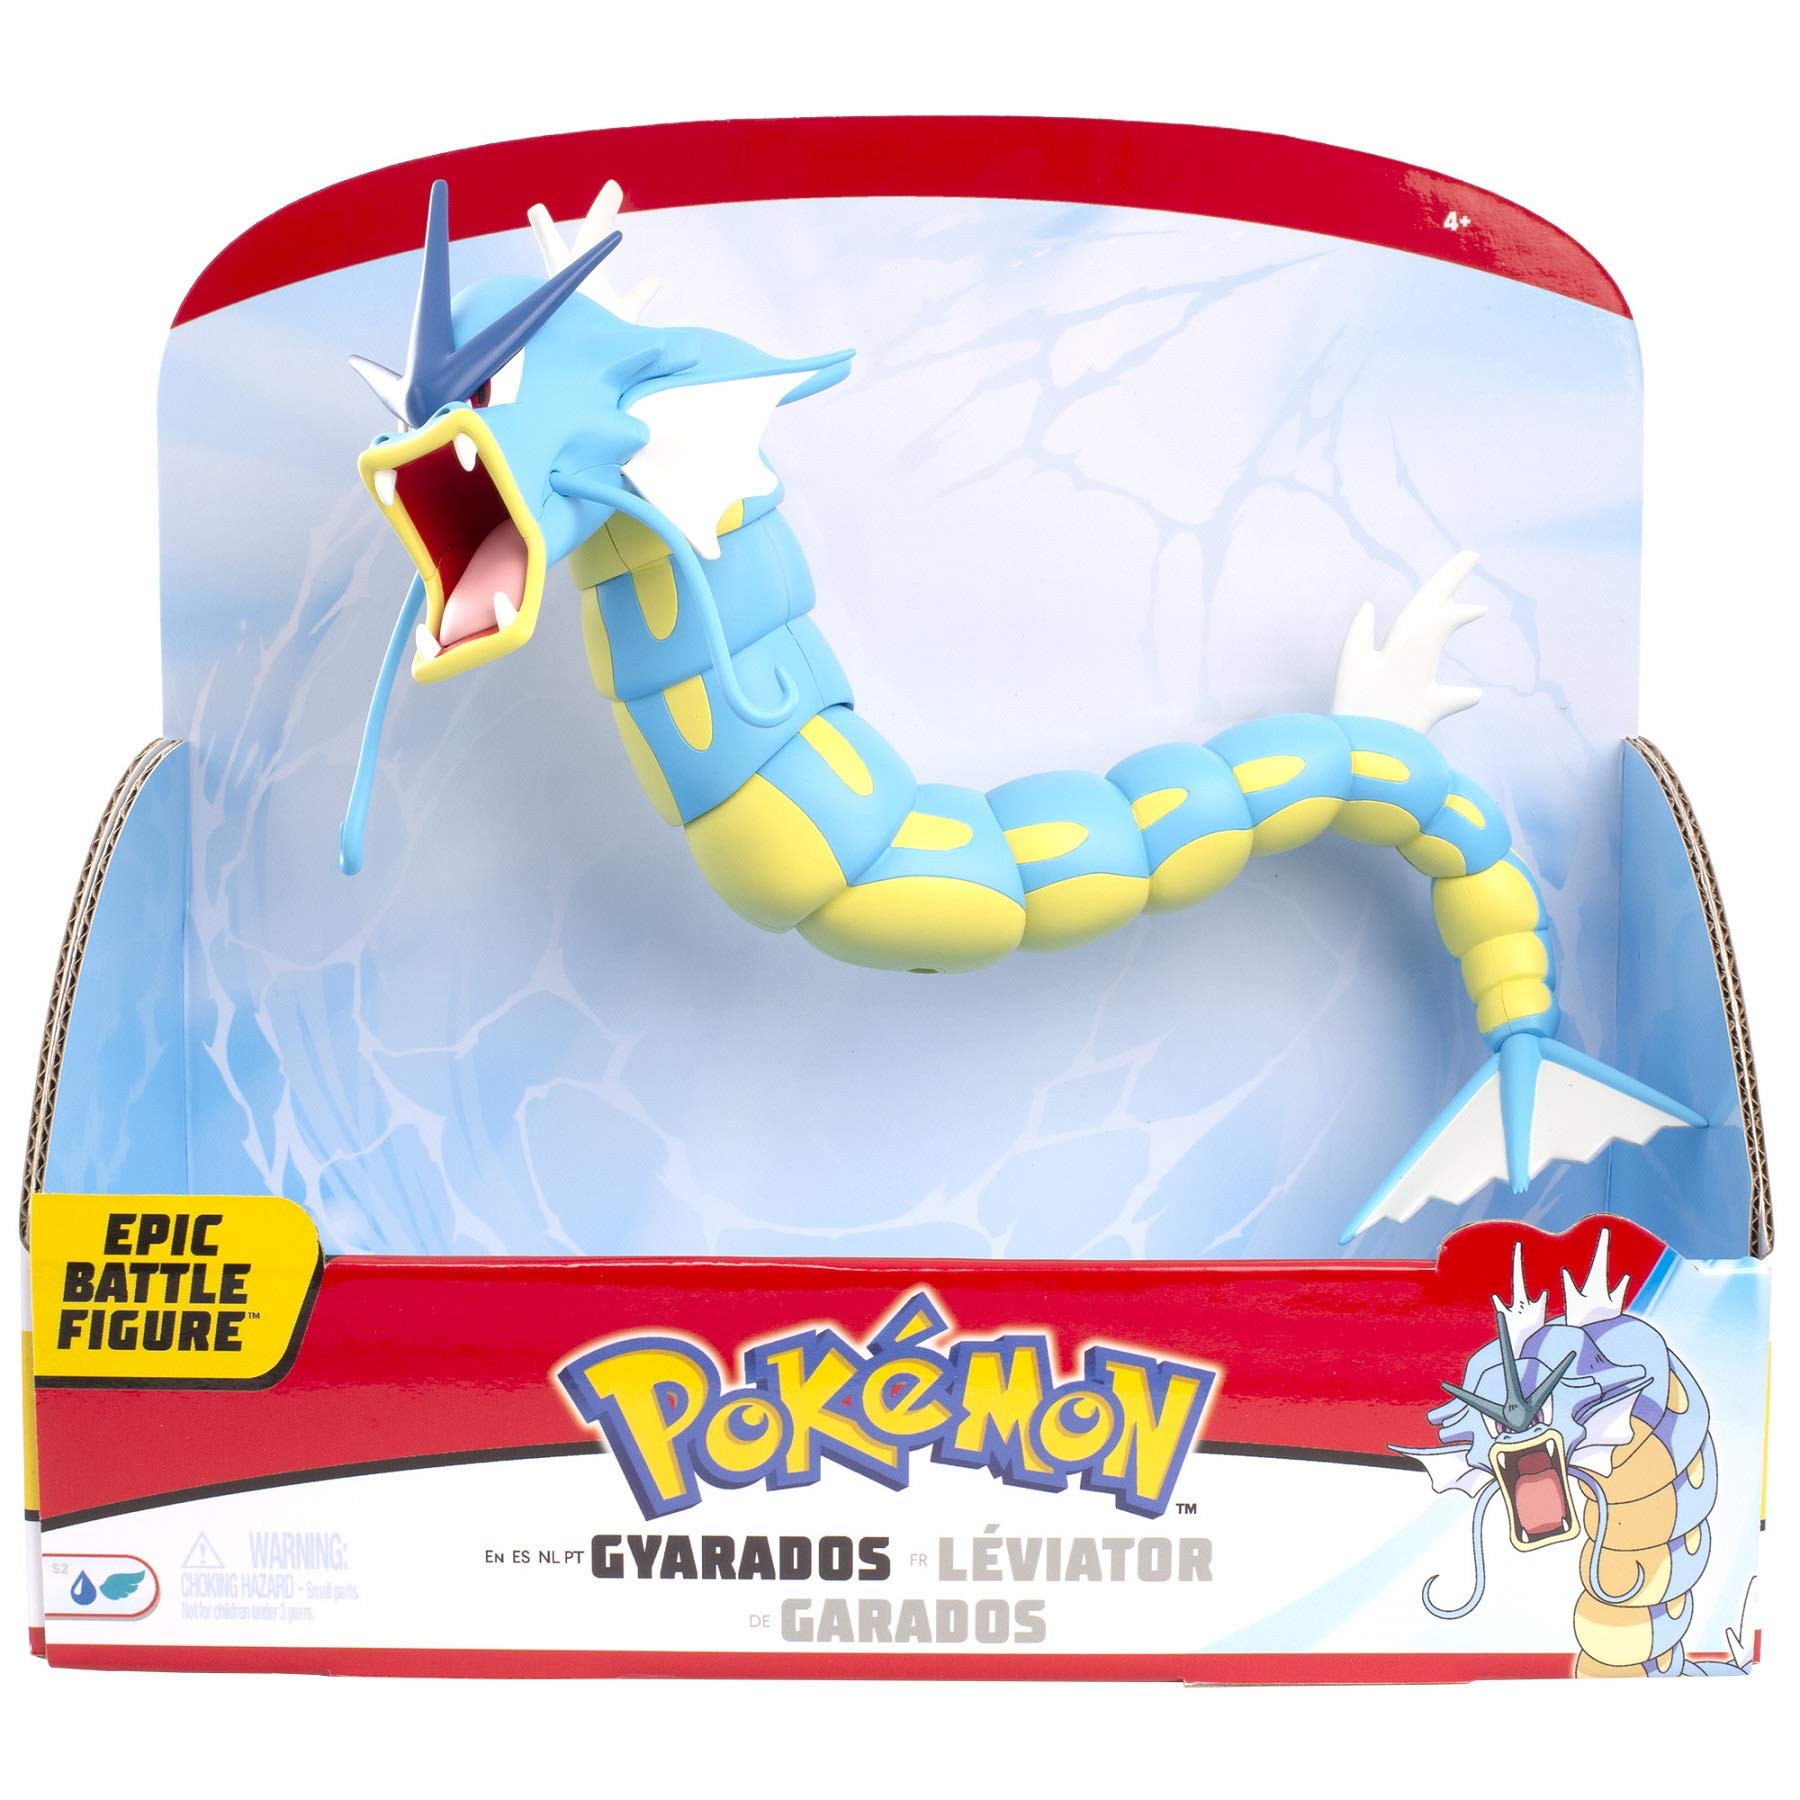 Pokemon Gyarados 12-Inch Epic Battle Figure - Authentic Details, Fully Articulated Figure - Toys Inspired by Smash-Hit Animated Series - Gotta Catch ‘Em All